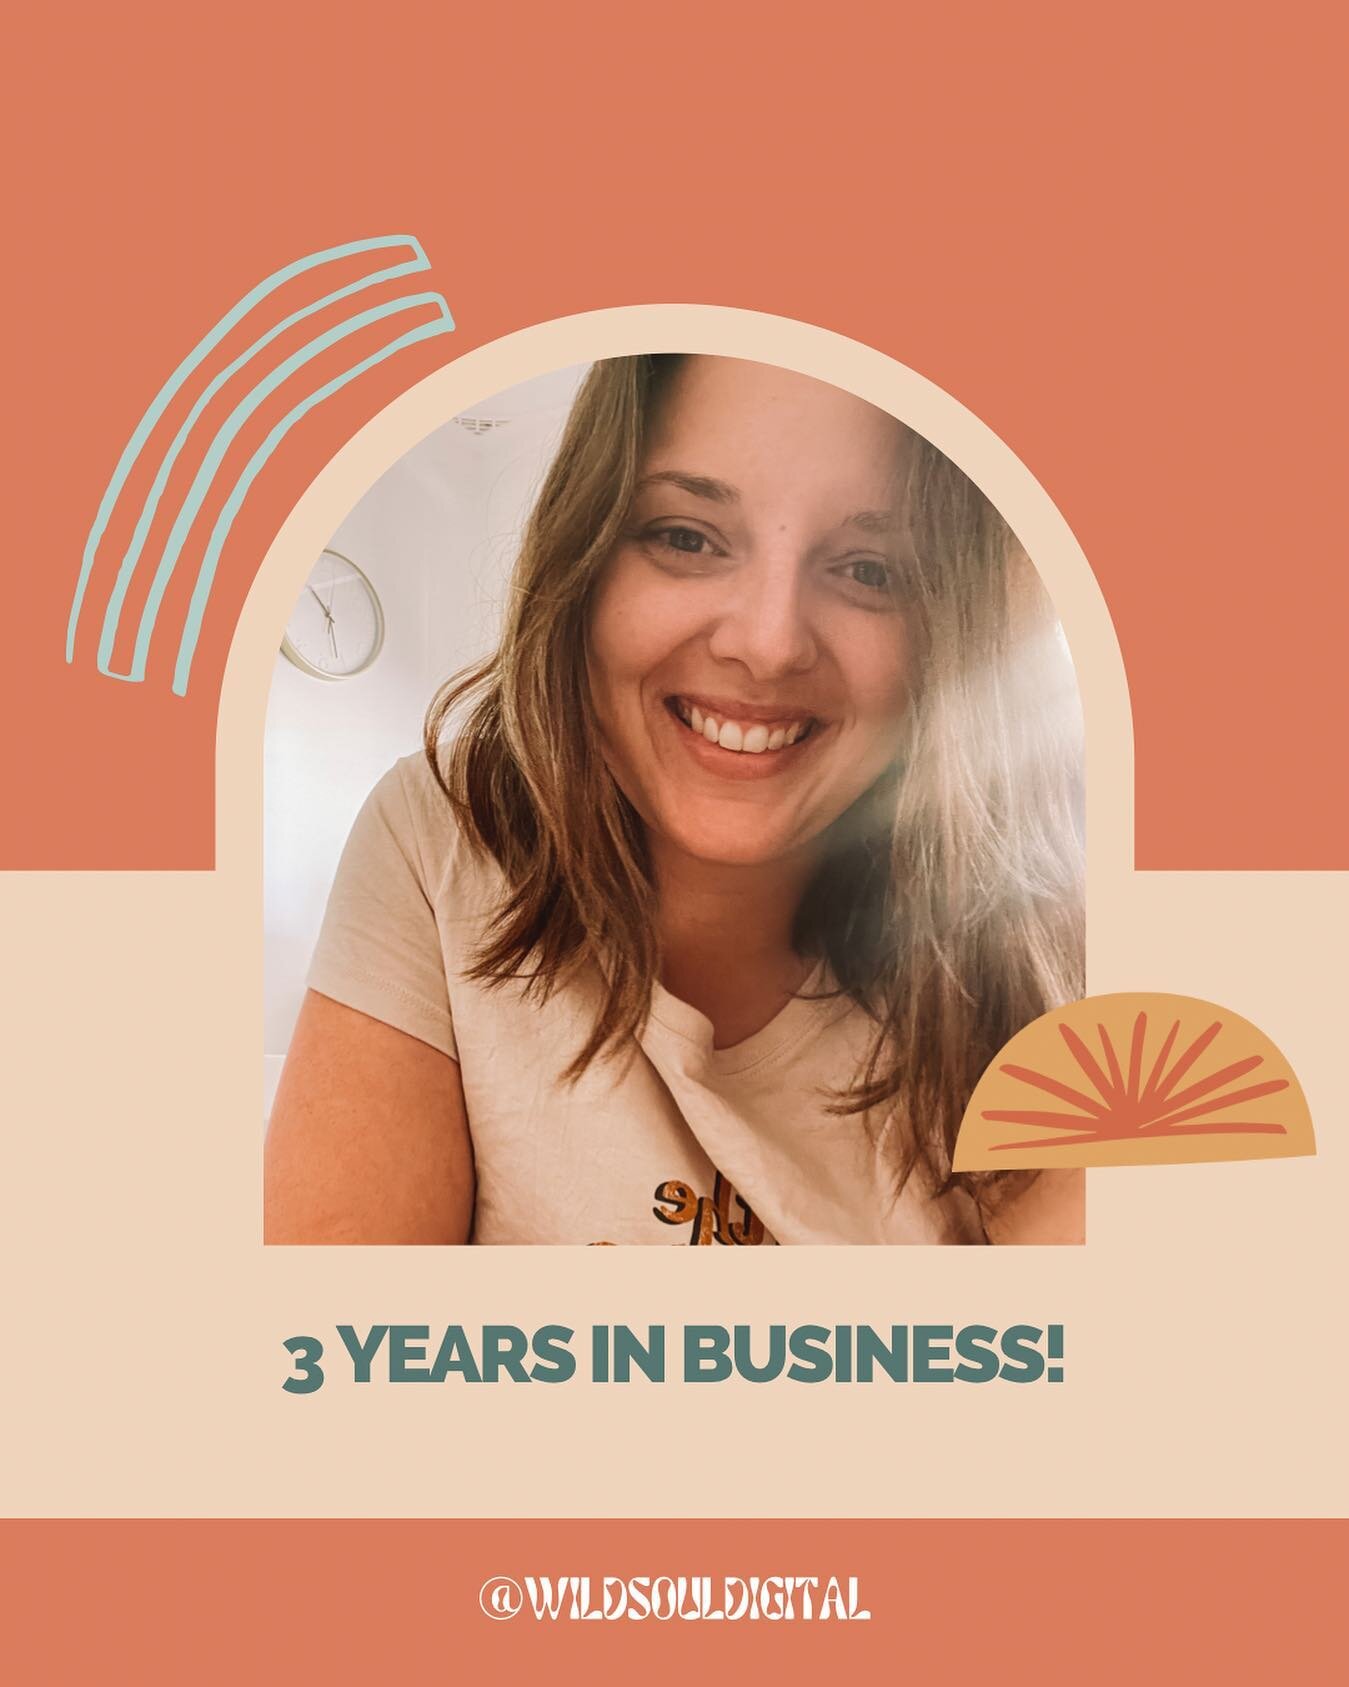 3 YEARS IN BUSINESS! 🎉

Wow. I can&rsquo;t actually believe I am celebrating my 3rd biz birthday today! 😳

But somehow it feels like I have been doing this forever! (In a good way of course 😉)

This last year has definitely been the most challengi